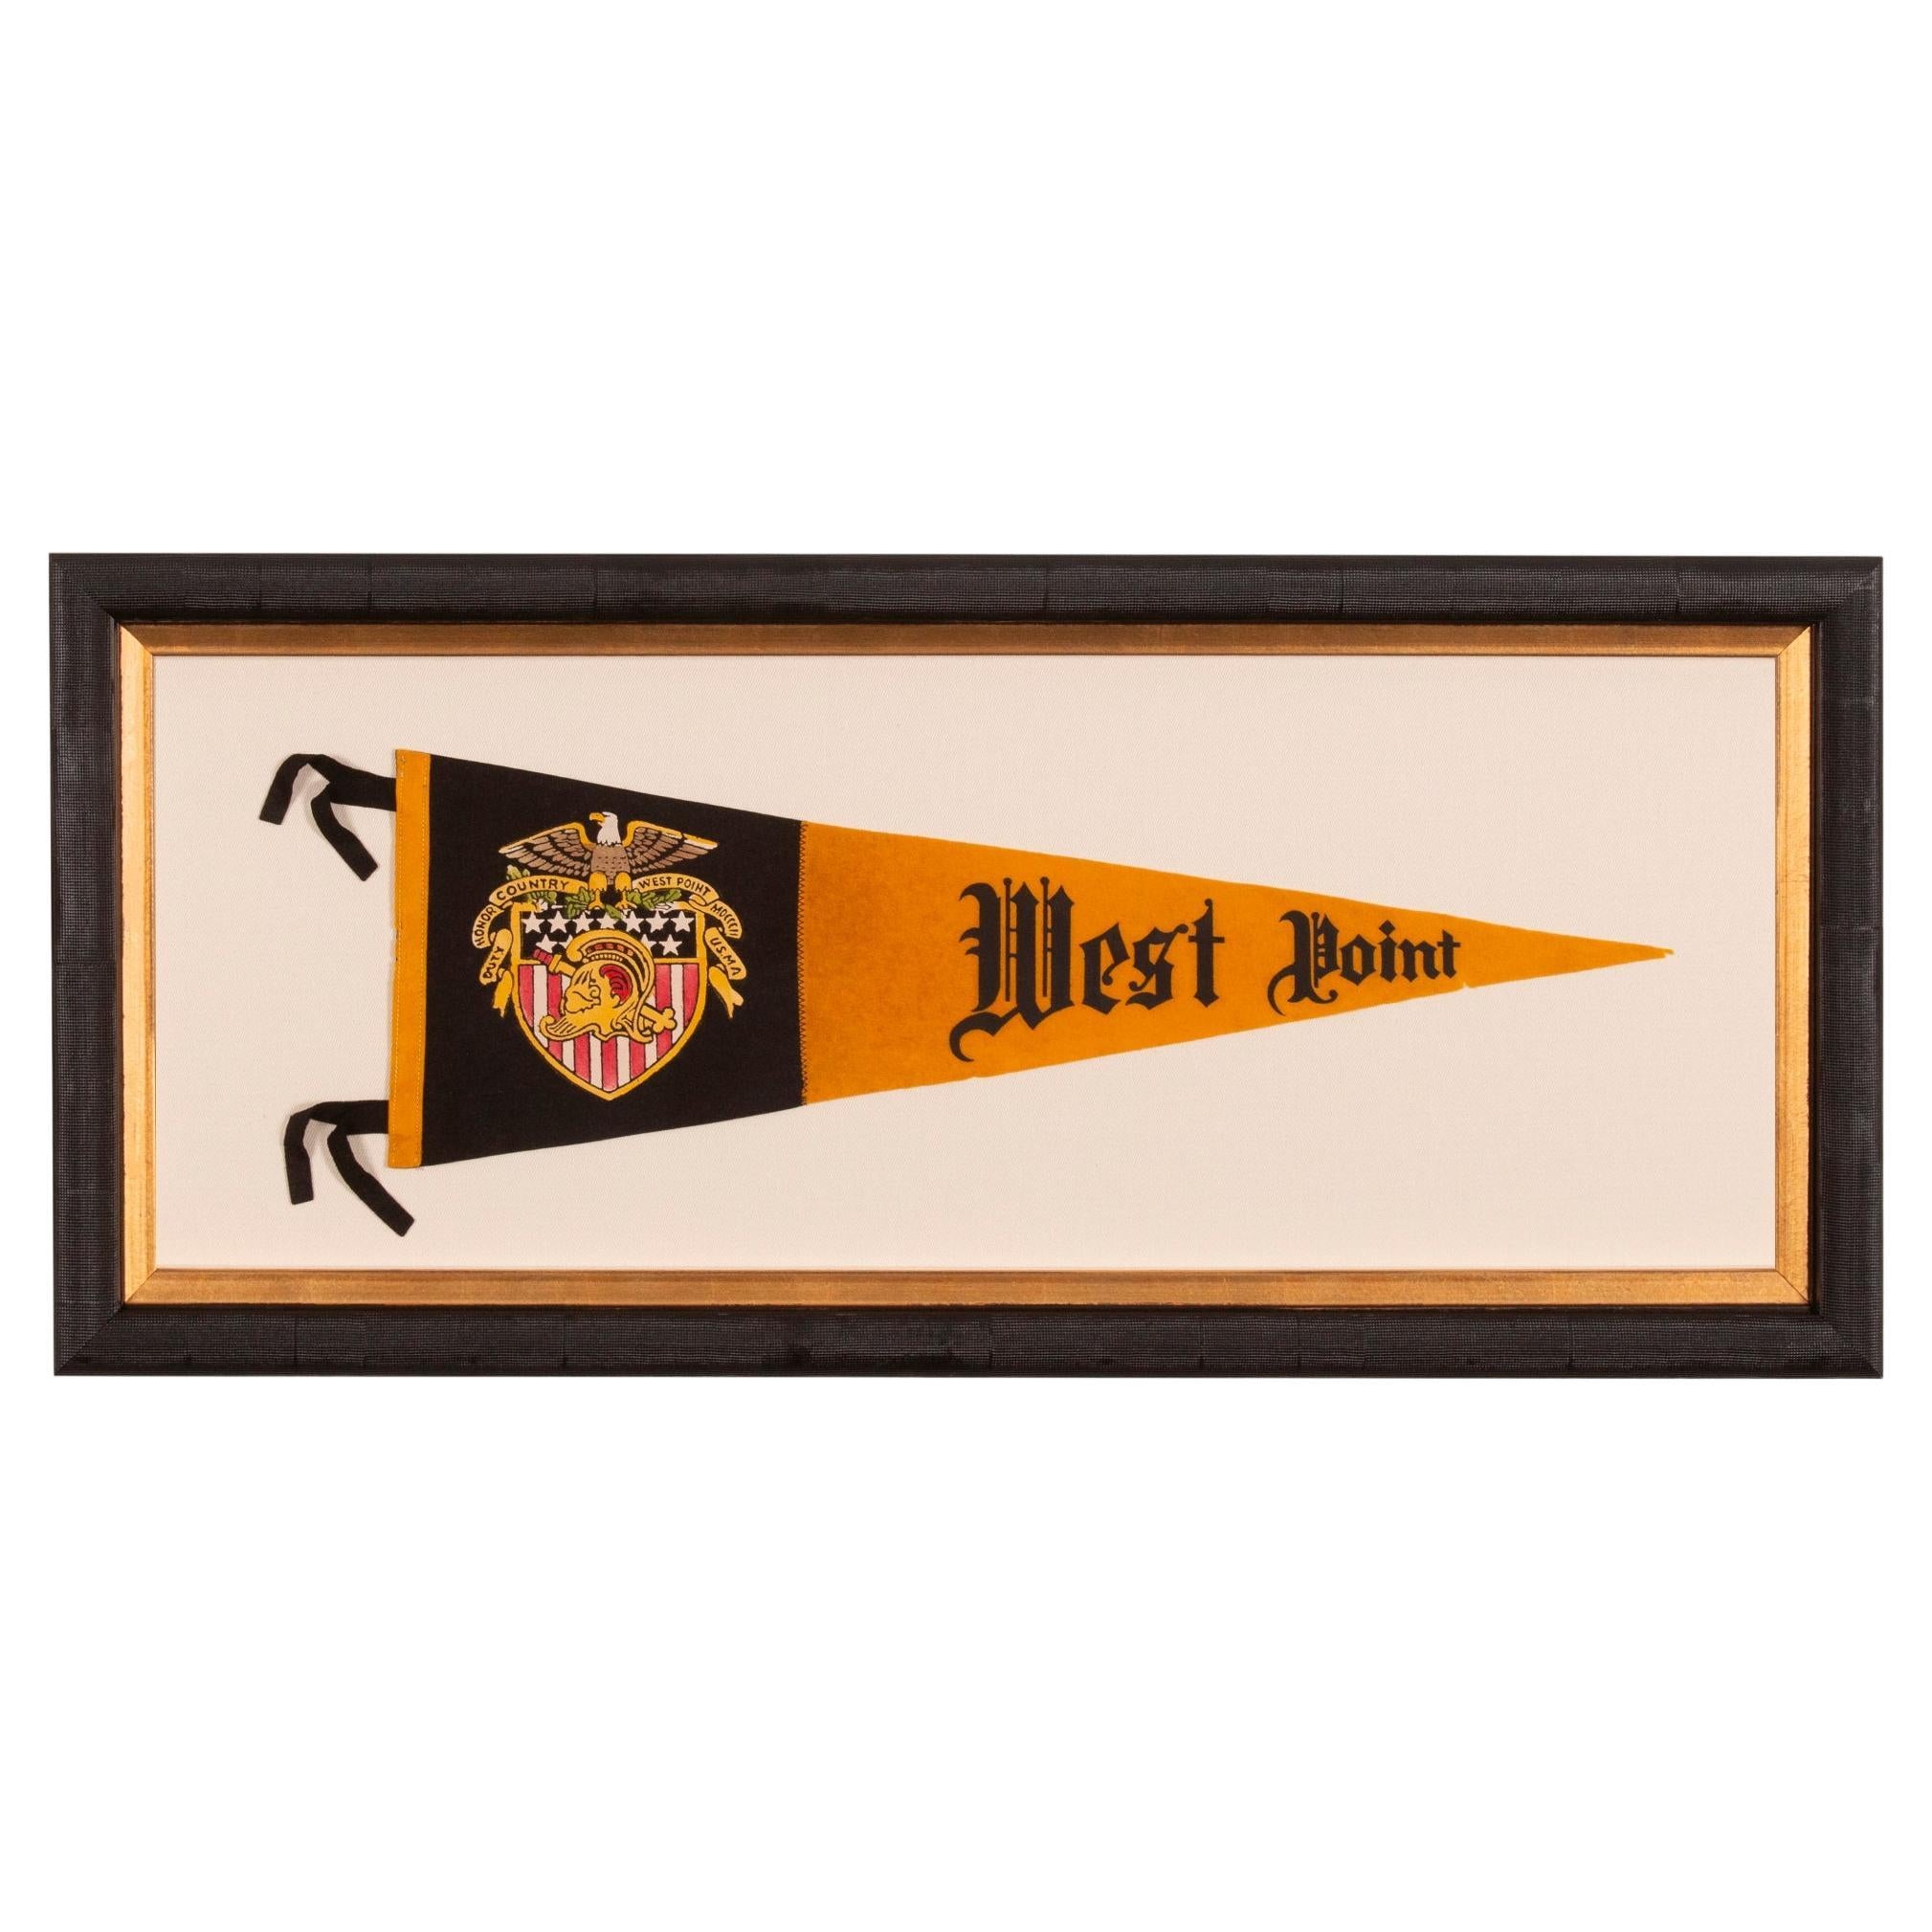 West Point Pennant with Striking Colors and Graphics, ca 1940-1950 For Sale